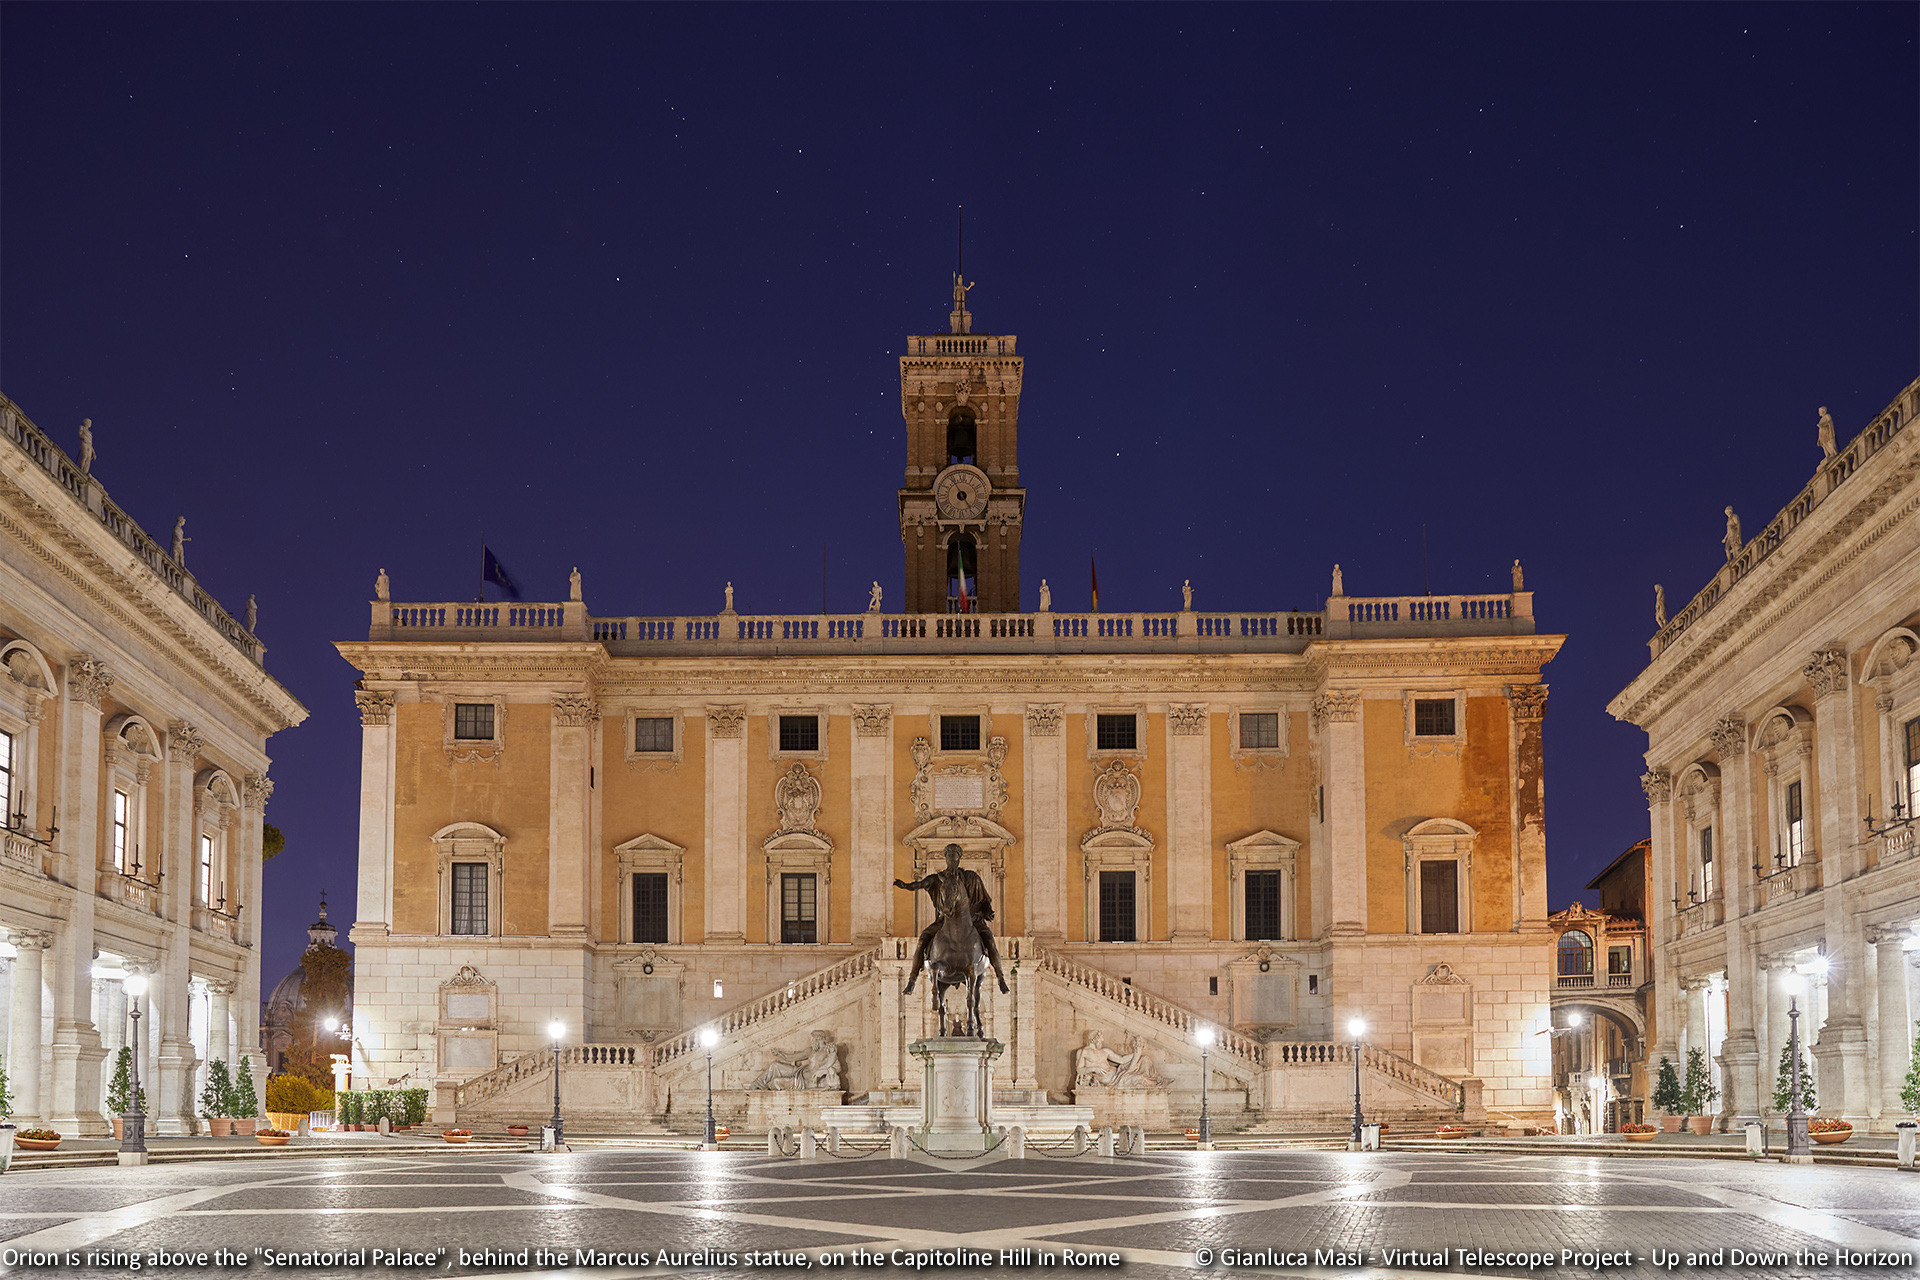 Orion is rising above the Senatorial Palace, behind the Marcus Aurelius statue. Capitoline Hill, Rome.